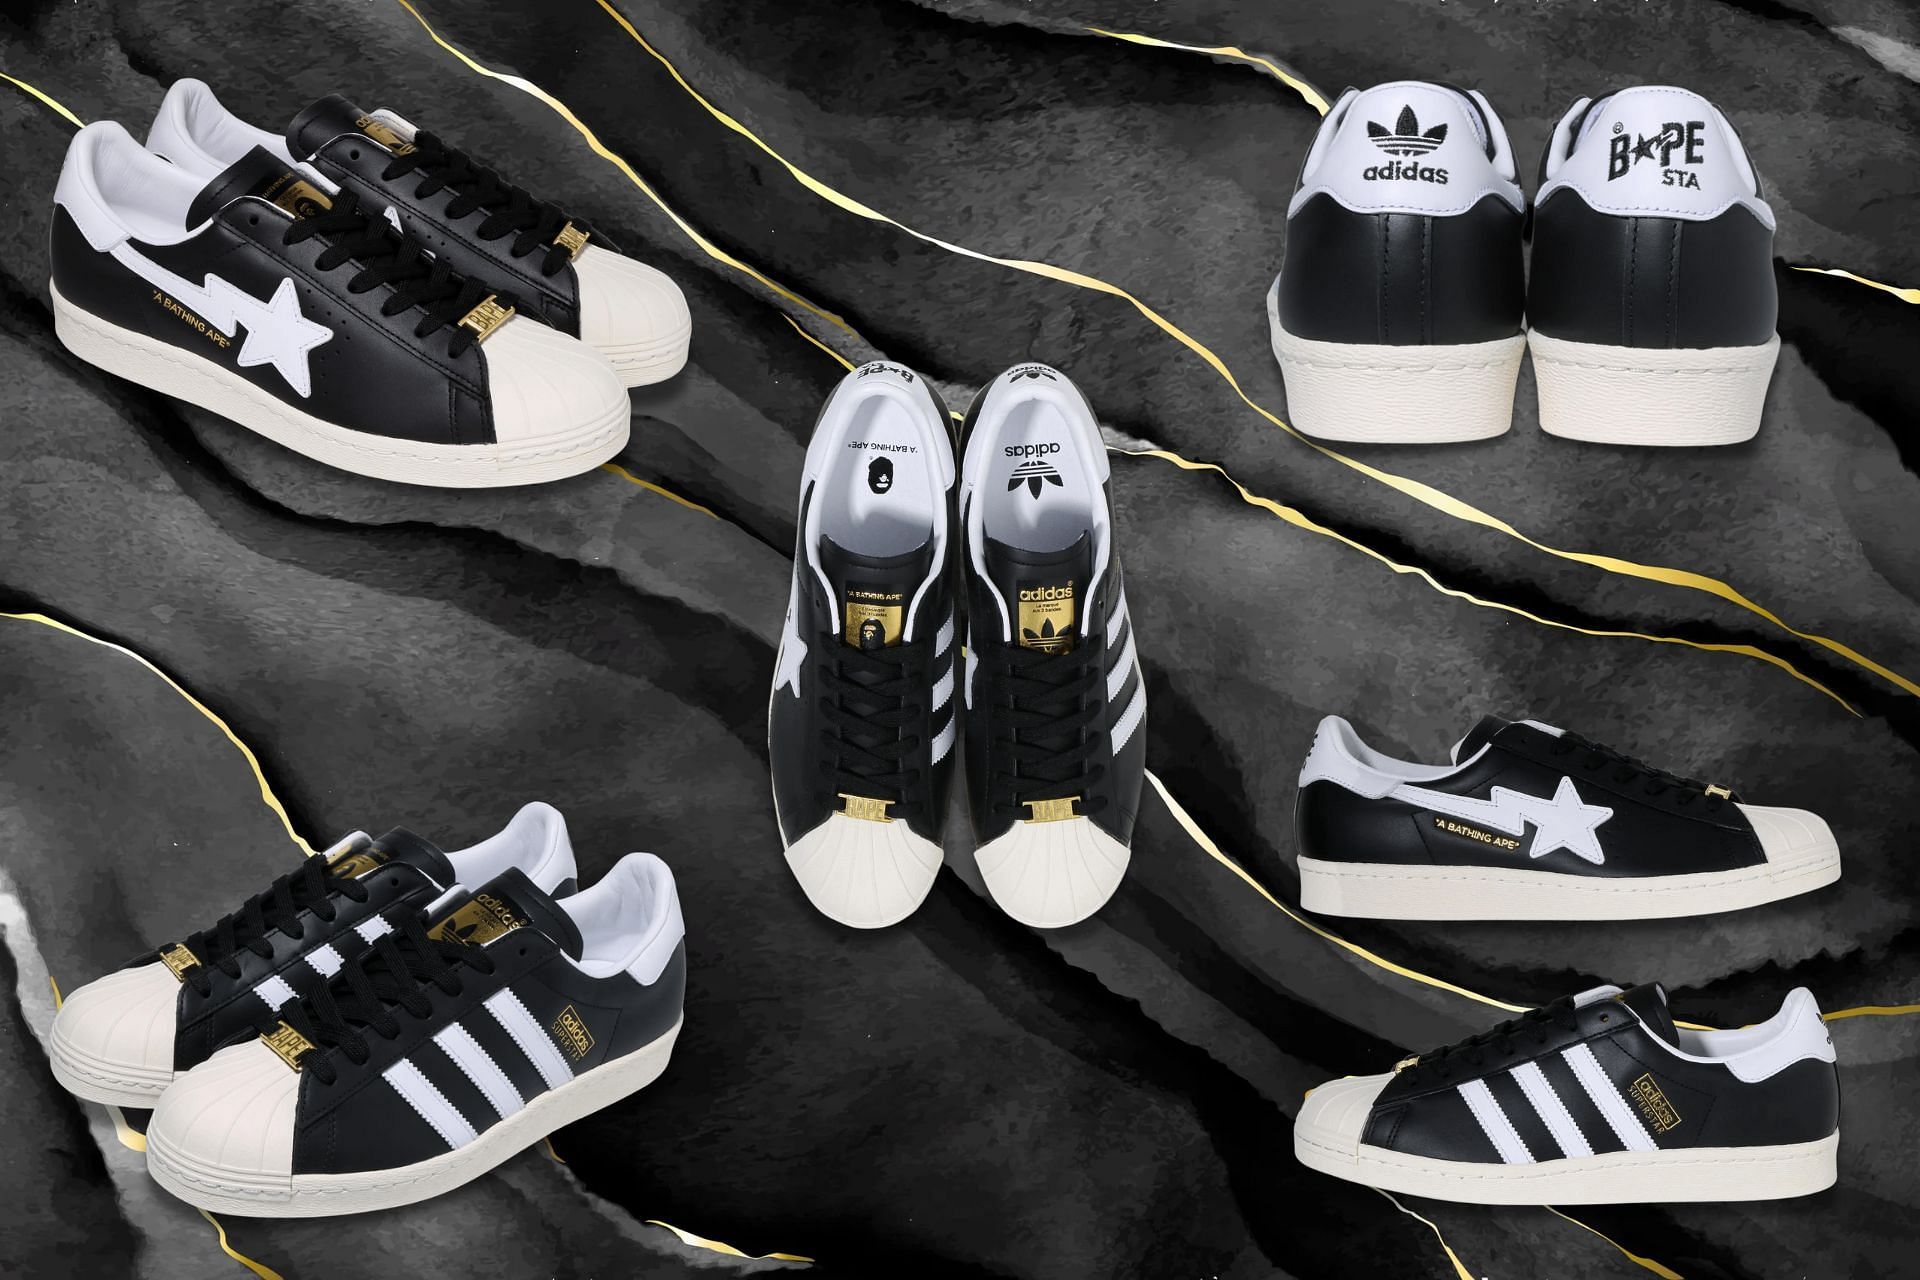 Where to buy A Bathing Ape x Adidas Originals sneakers? Price